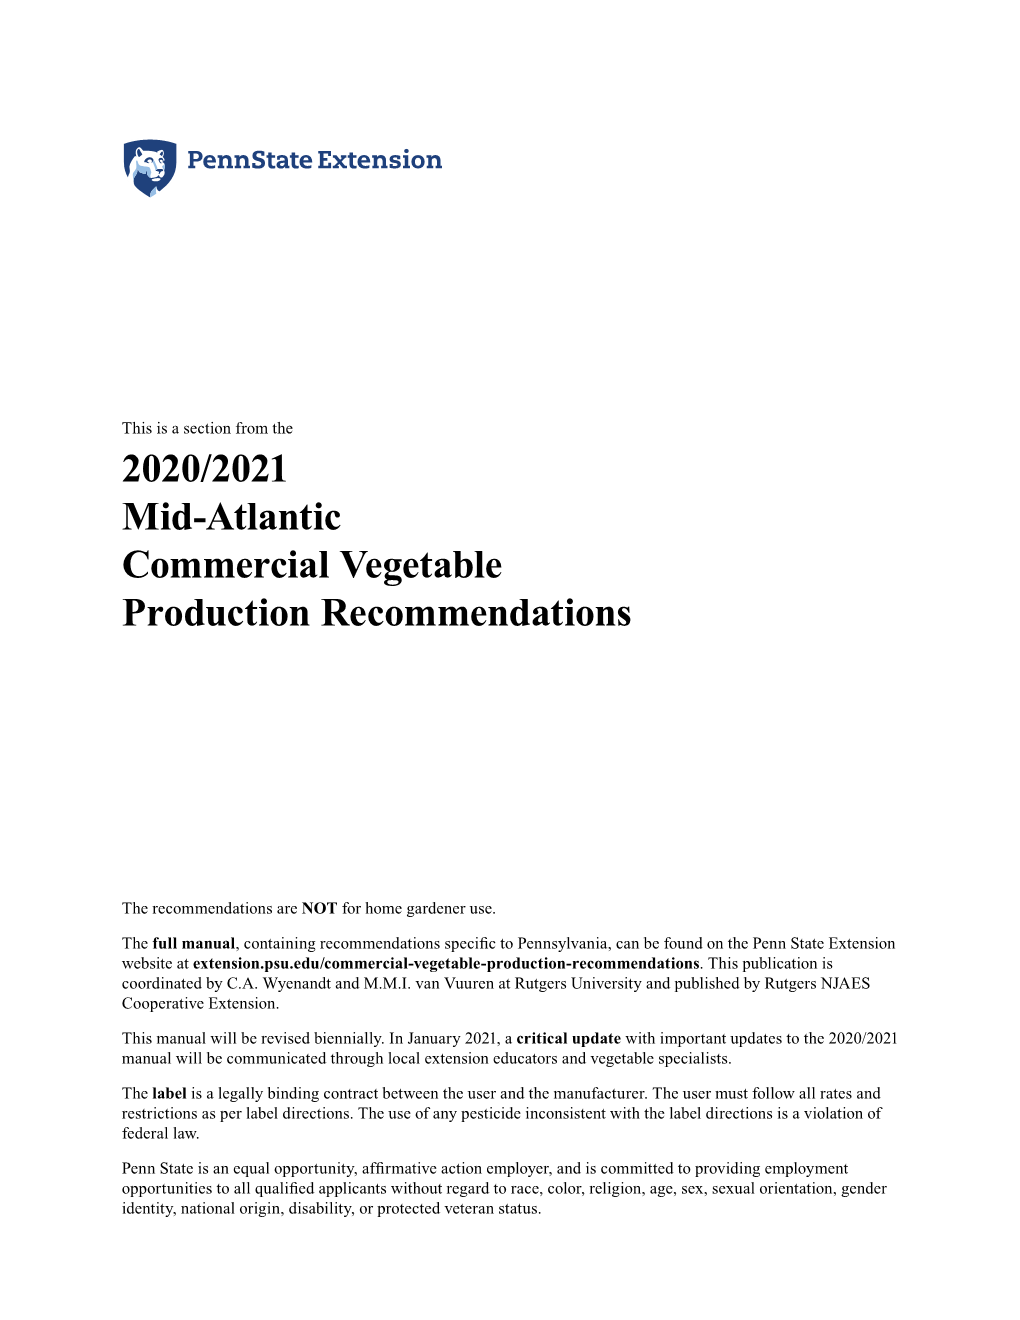 2020/2021 Mid-Atlantic Commercial Vegetable Production Recommendations